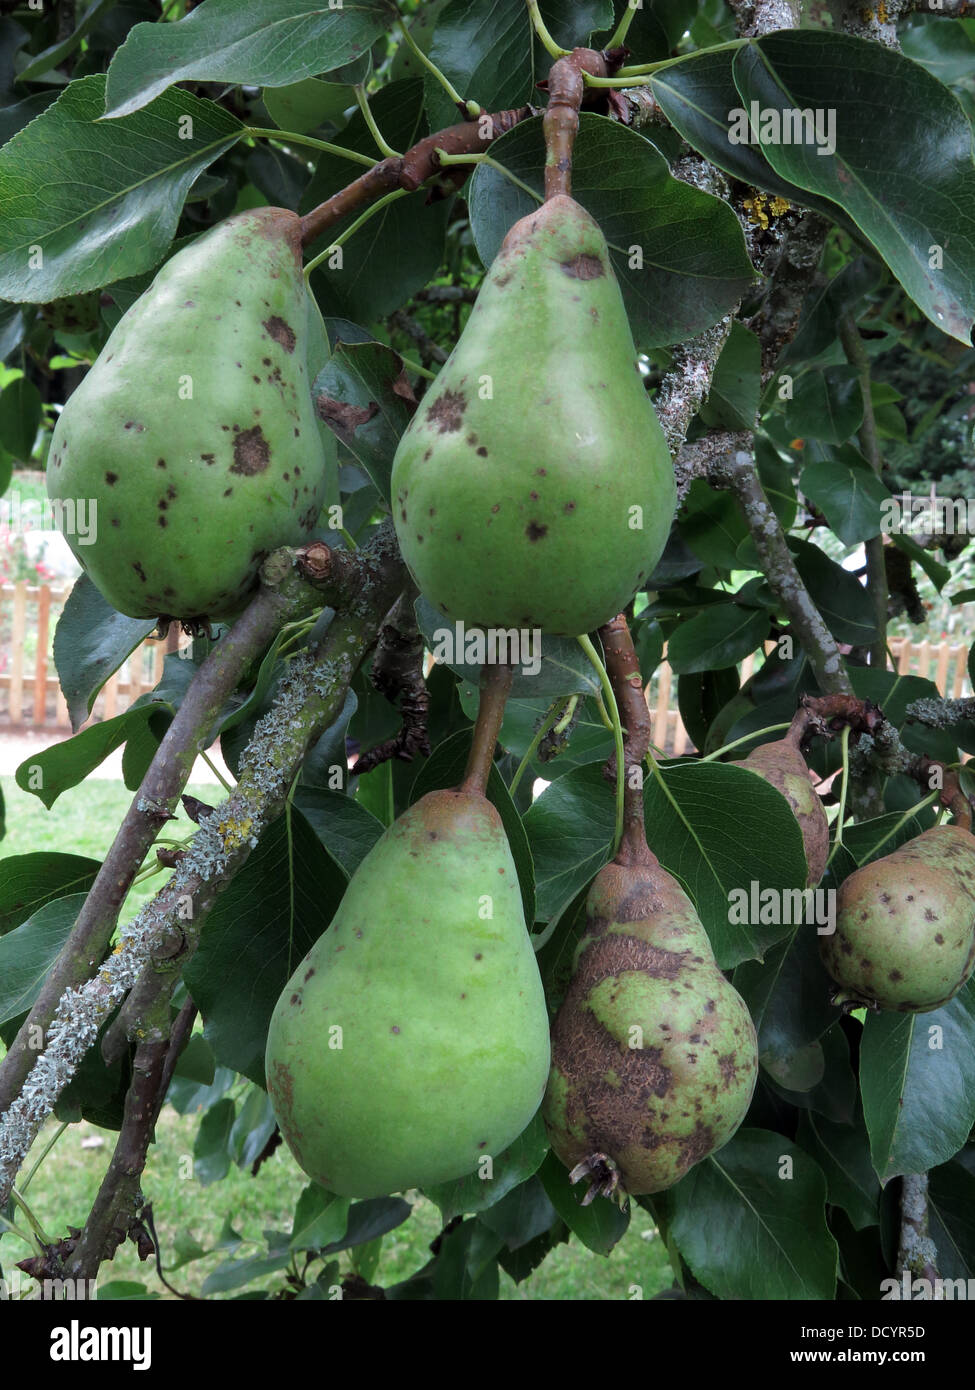 Green Pears ripening on a Pear Tree Stock Photo